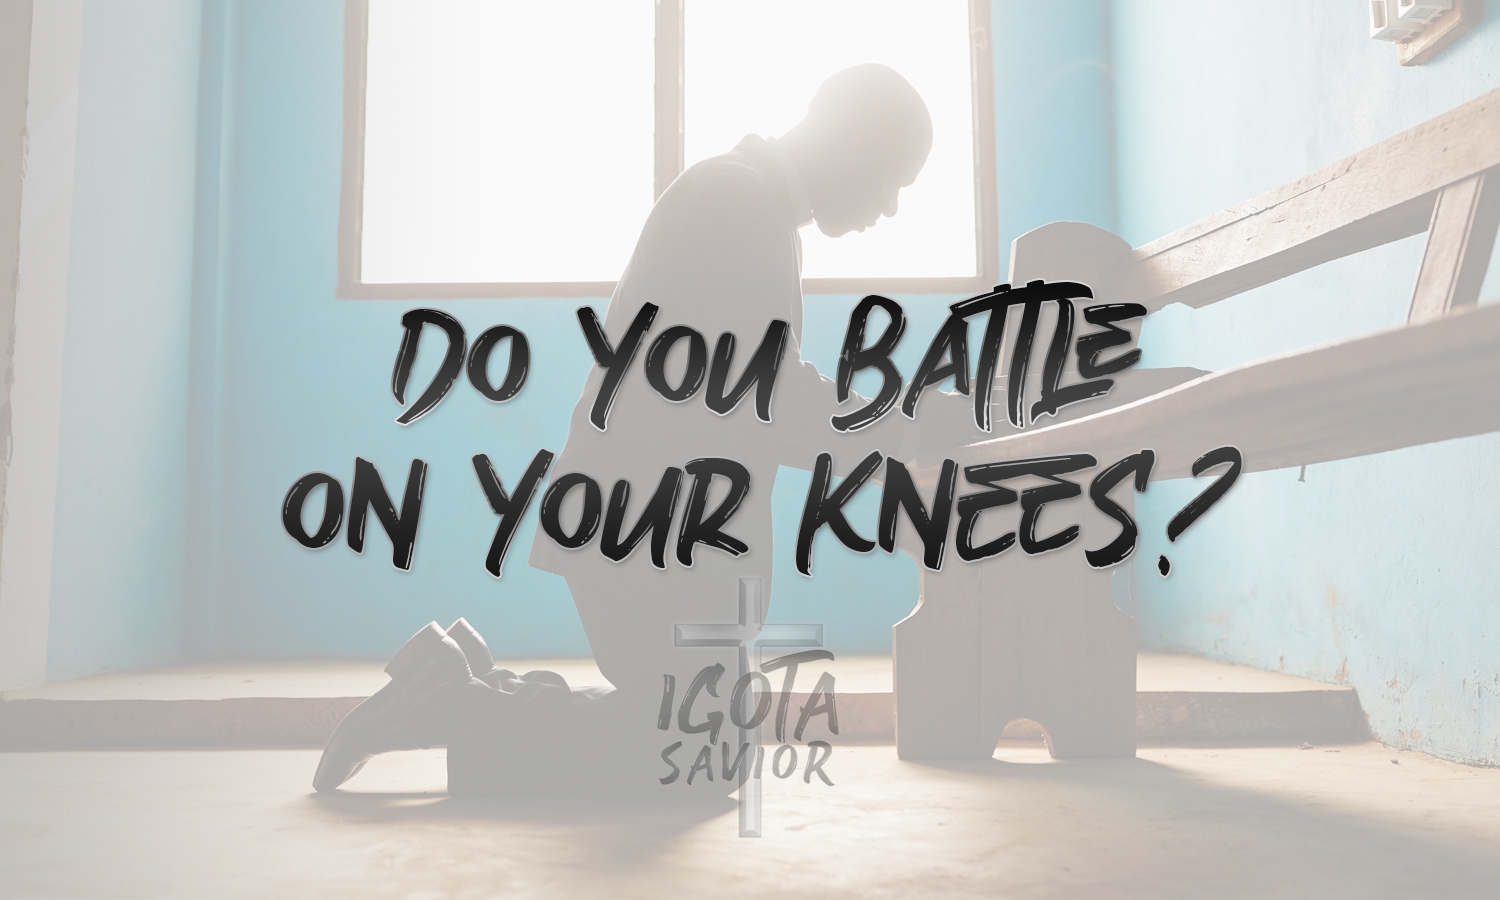 Do You Battle On Your Knees?